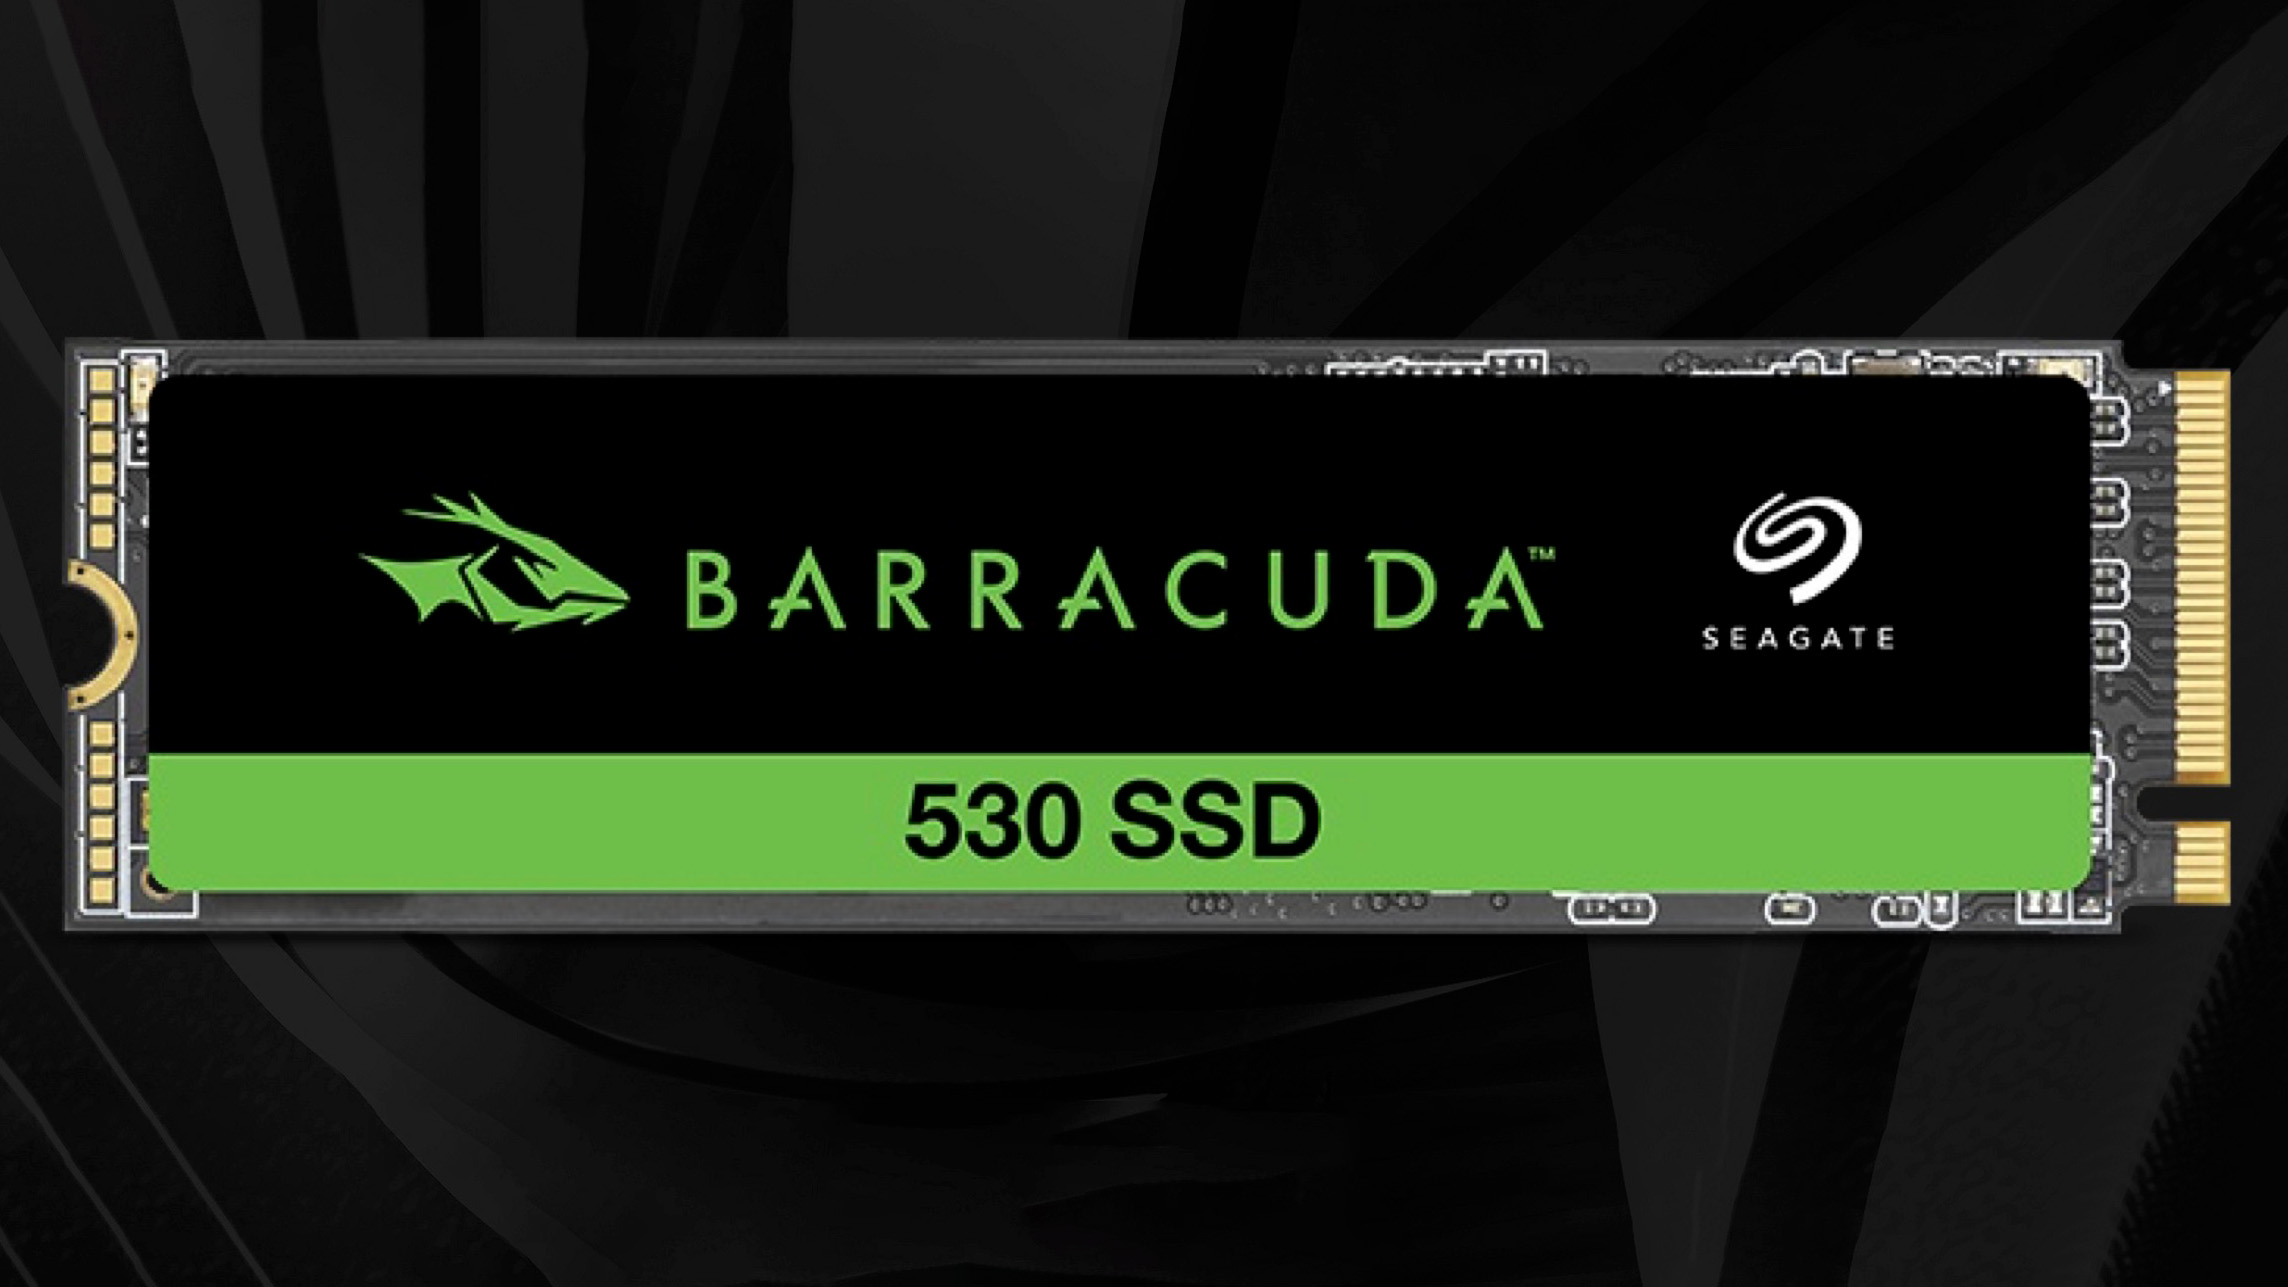 Seagate BarraCuda 530 SSD breaks cover with 7,400 MB/s speeds — Still PCIe 4.0, but looks like a significant upgrade over the previous 520